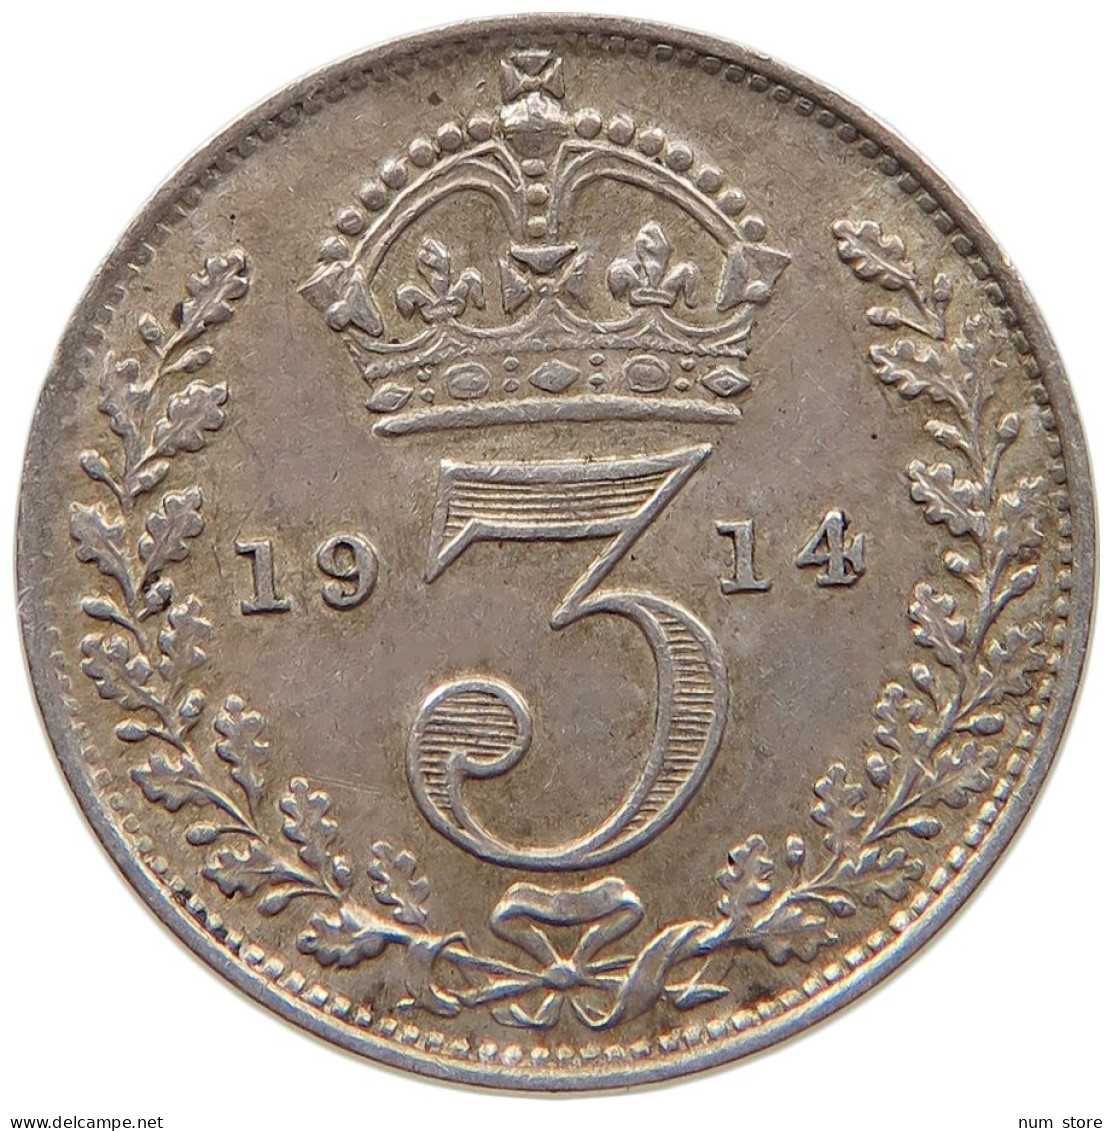 GREAT BRITAIN THREEPENCE 1914 George V. (1910-1936) #c016 0363 - F. 3 Pence